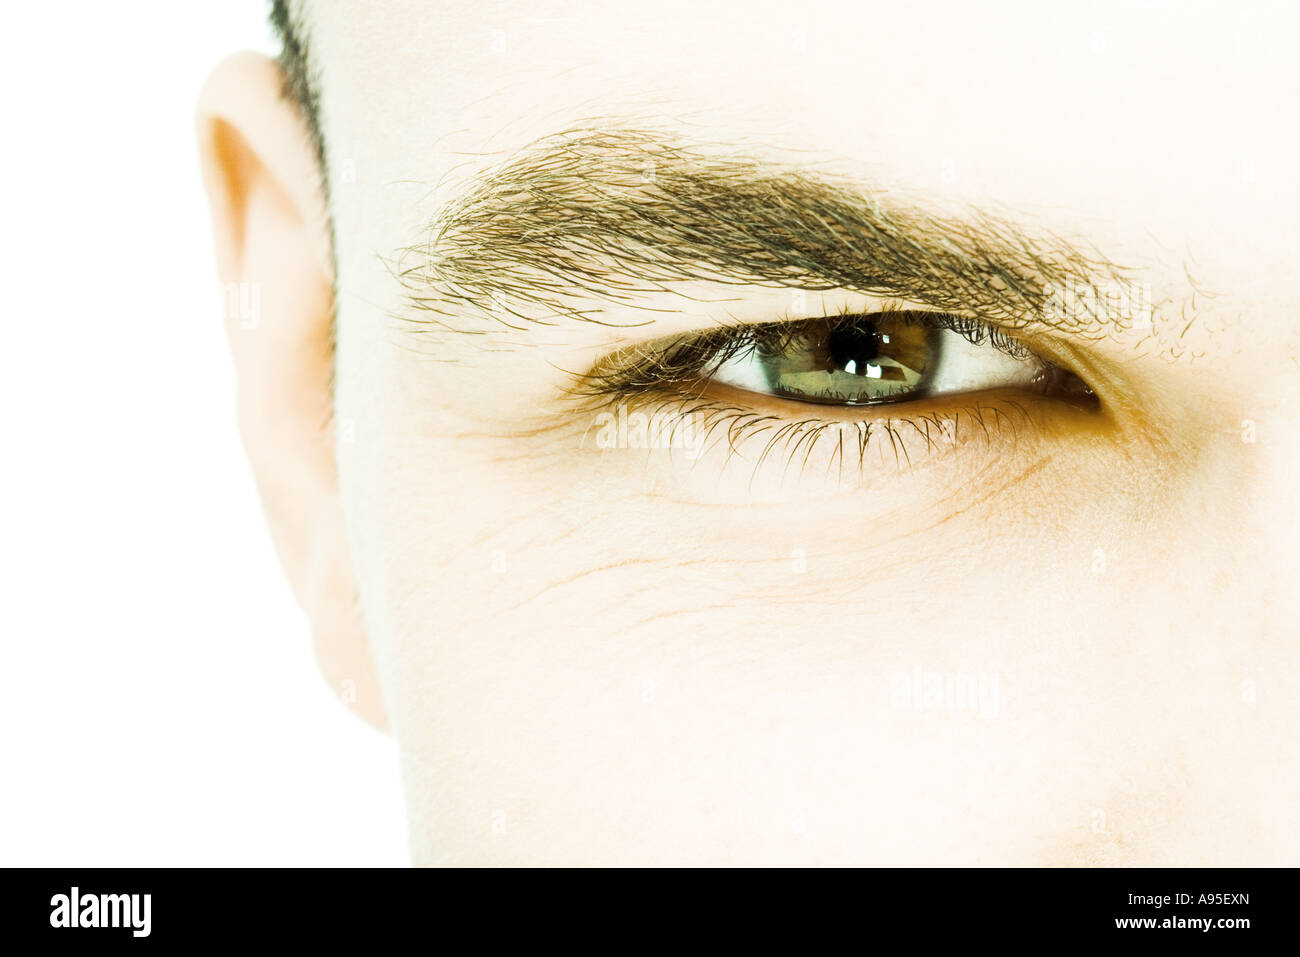 Young man's eye, extreme close-up Stock Photo